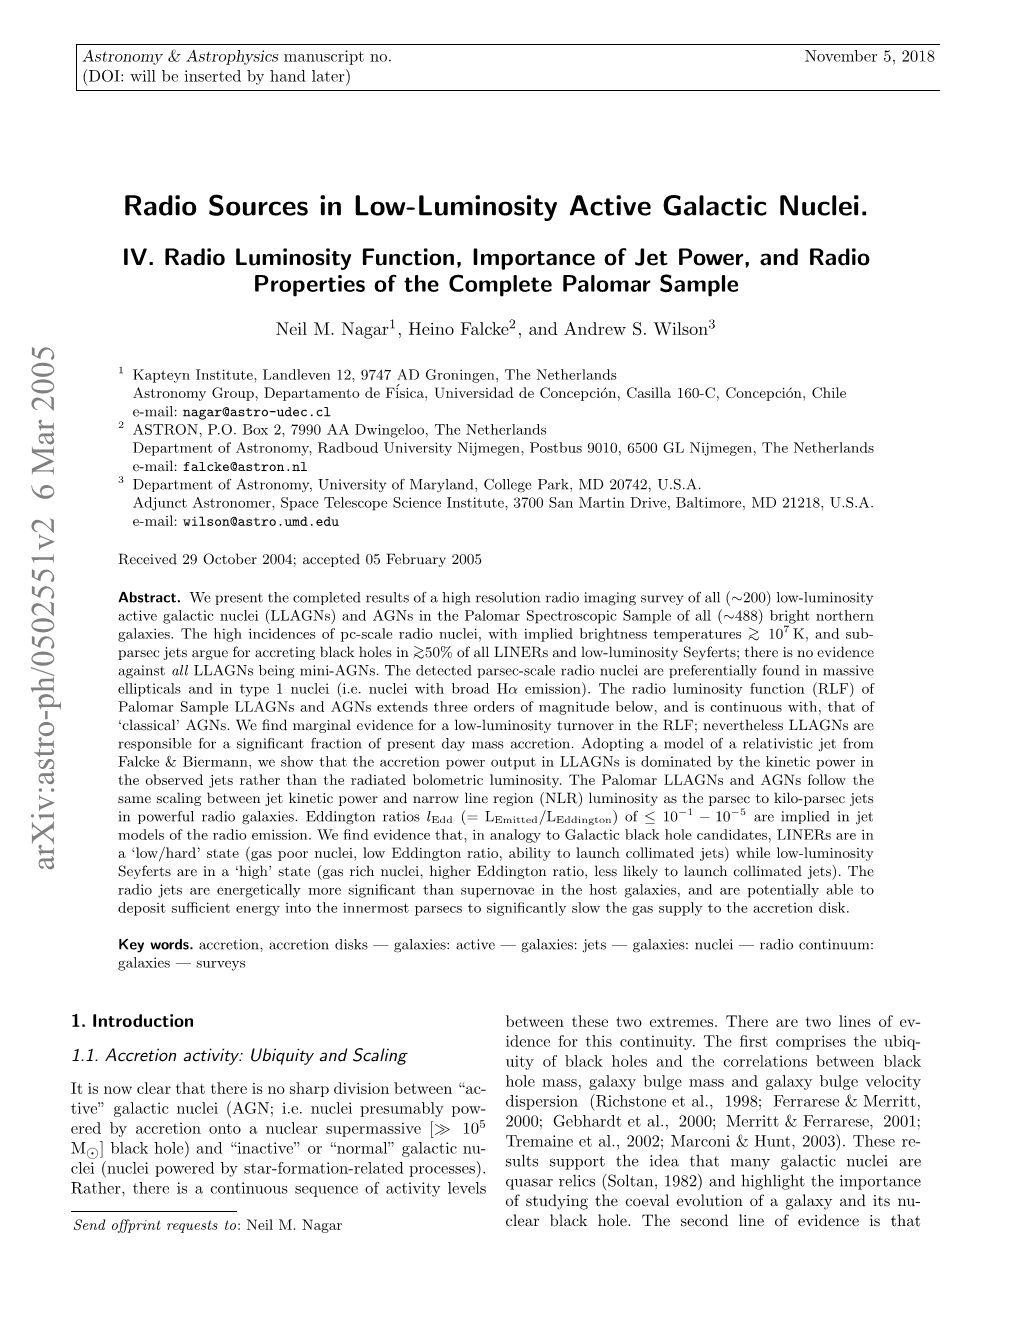 Radio Sources in Low-Luminosity Active Galactic Nuclei